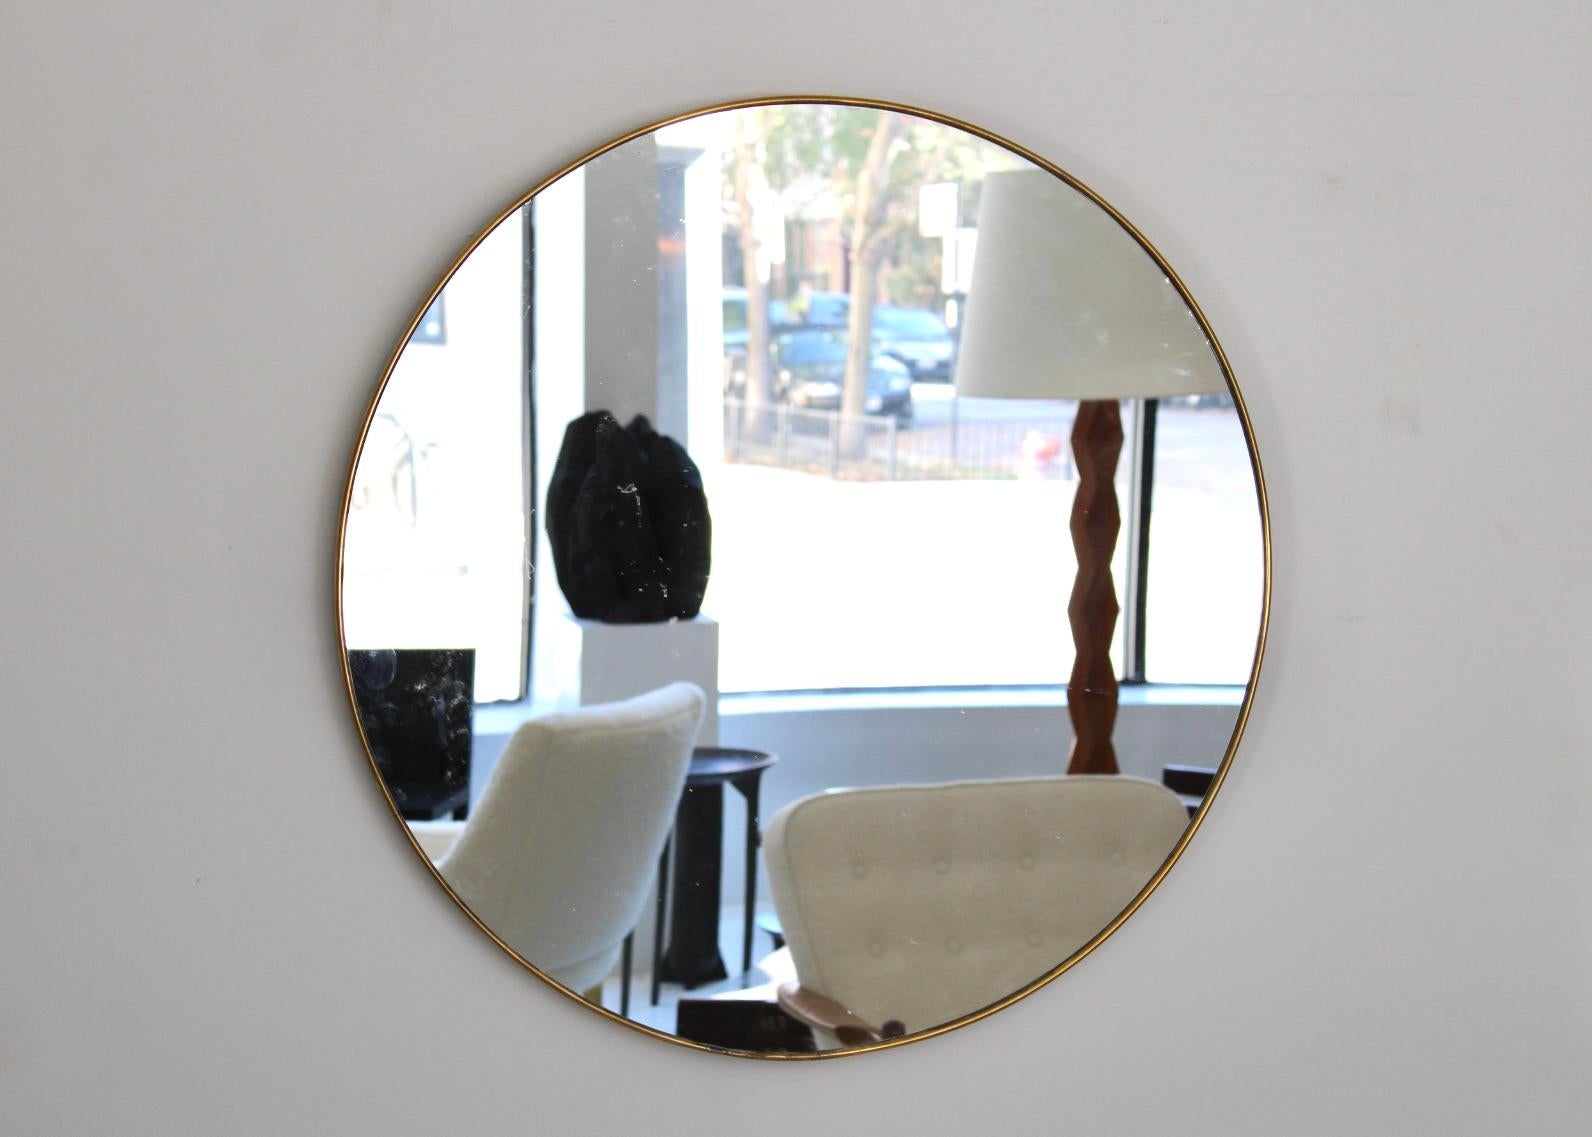 Elegant vintage wall mirror with deep solid patina brass frame and mirror glass. Made in Italy in the 1960s, original and not a reproduction.
At the back the mirror is reinforced with a wooden plate. Very elegant tapering shape.
the thickness is 1